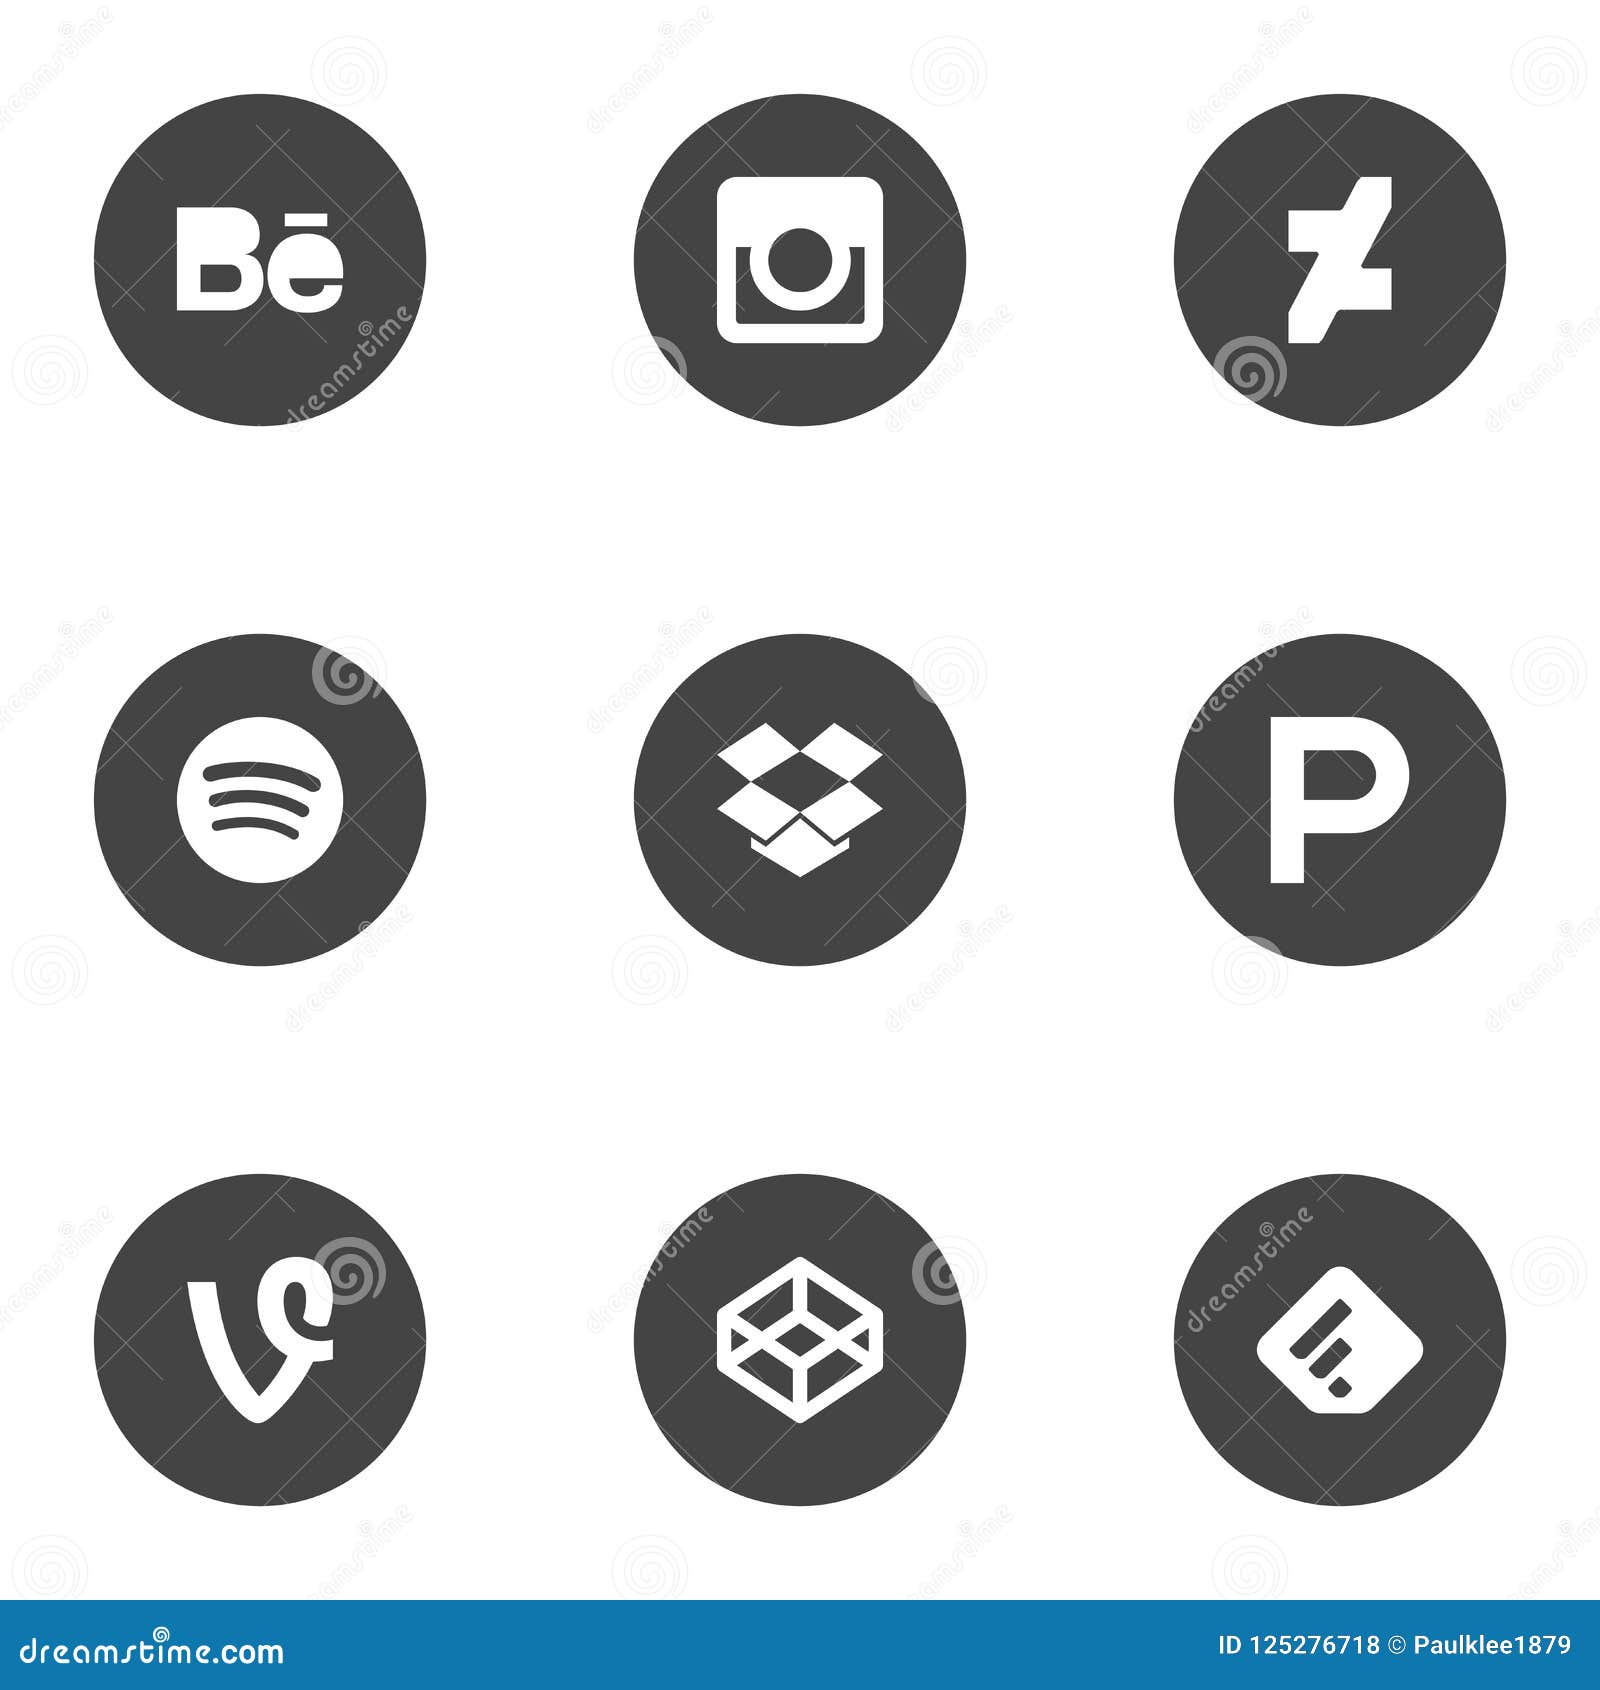 Collection Of Social Media Icons Printed On White Paper Editorial Stock